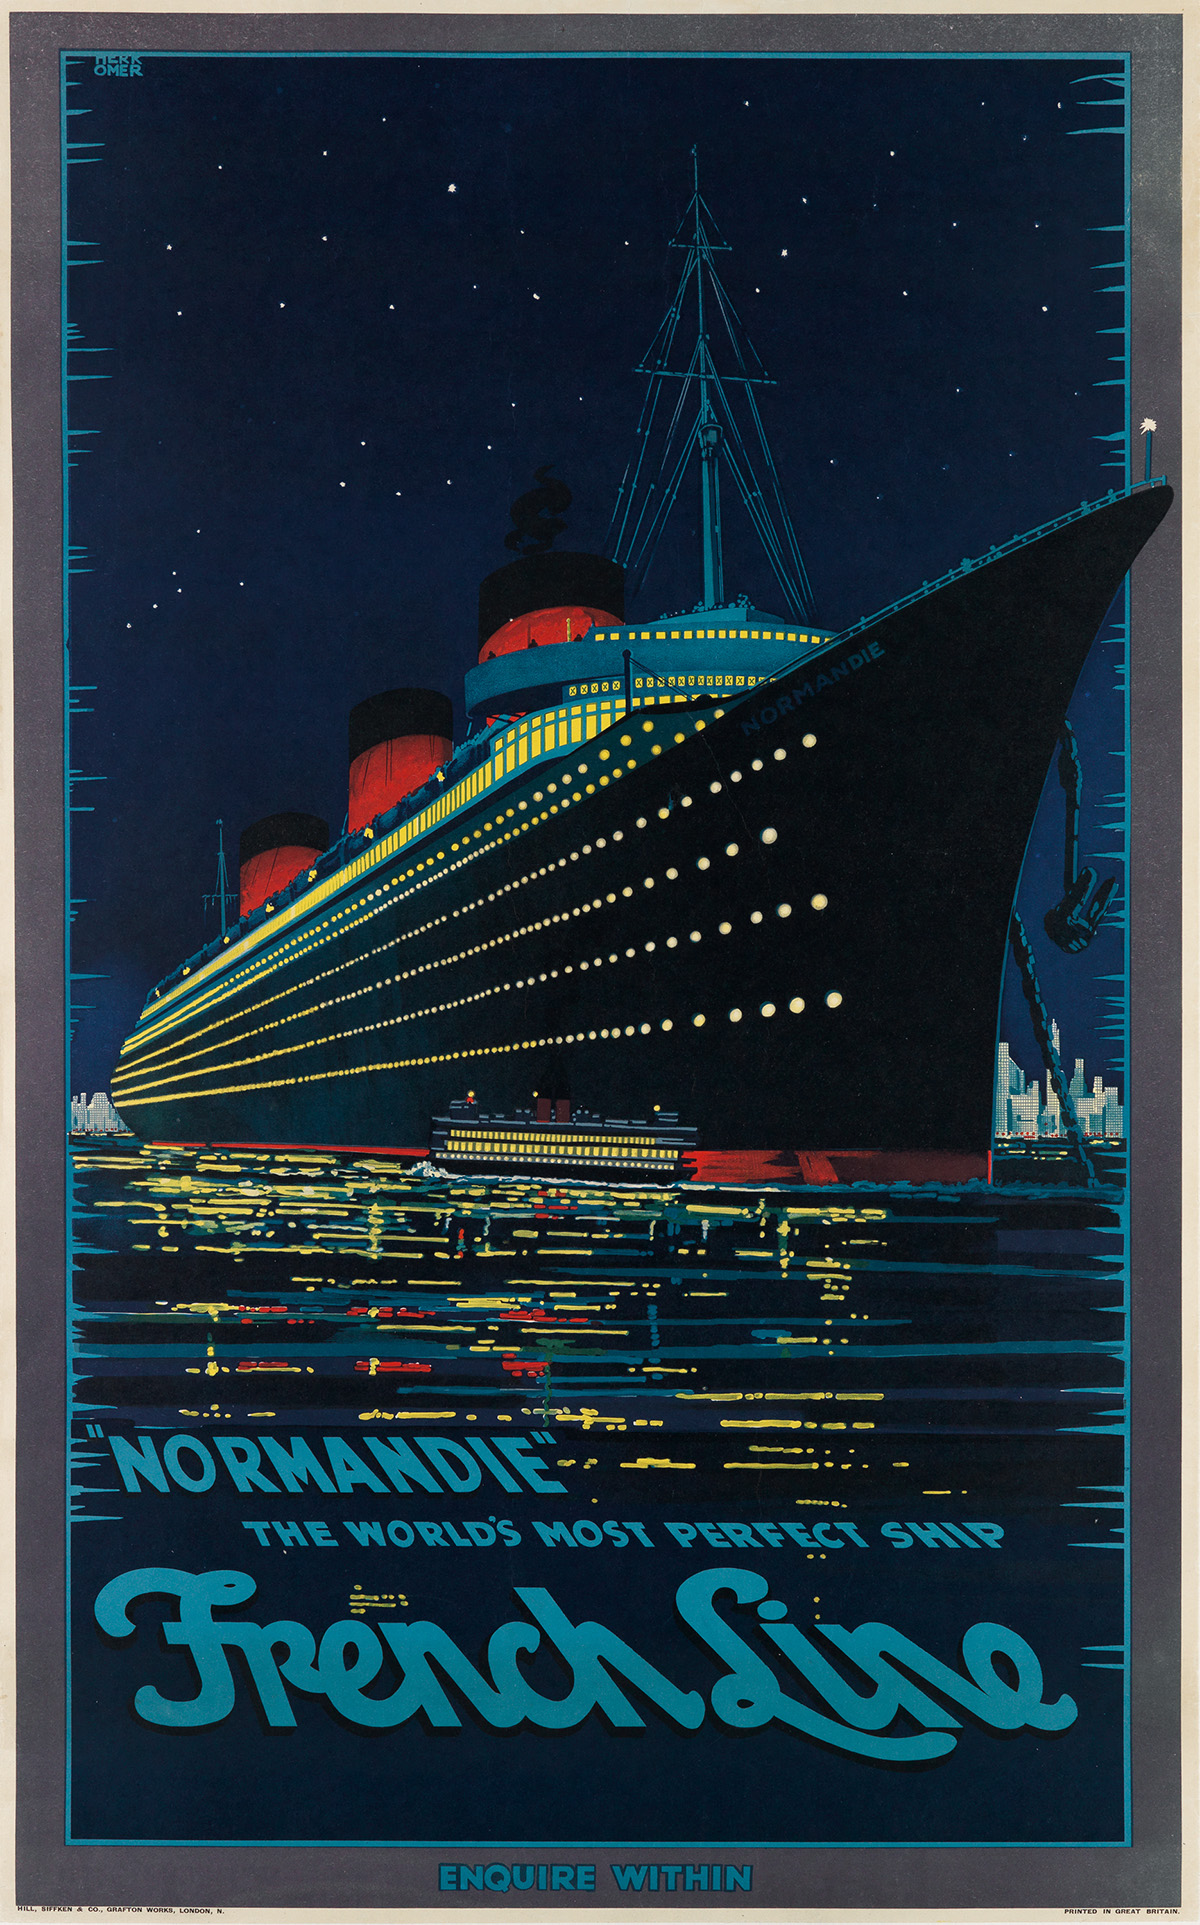 HUBERT HERKOMER (1881-?). NORMANDIE / THE WORLDS MOST PERFECT SHIP / FRENCH LINE. 1939. 40x24 inches, 101x63 cm. Hill, Siffken & Co.